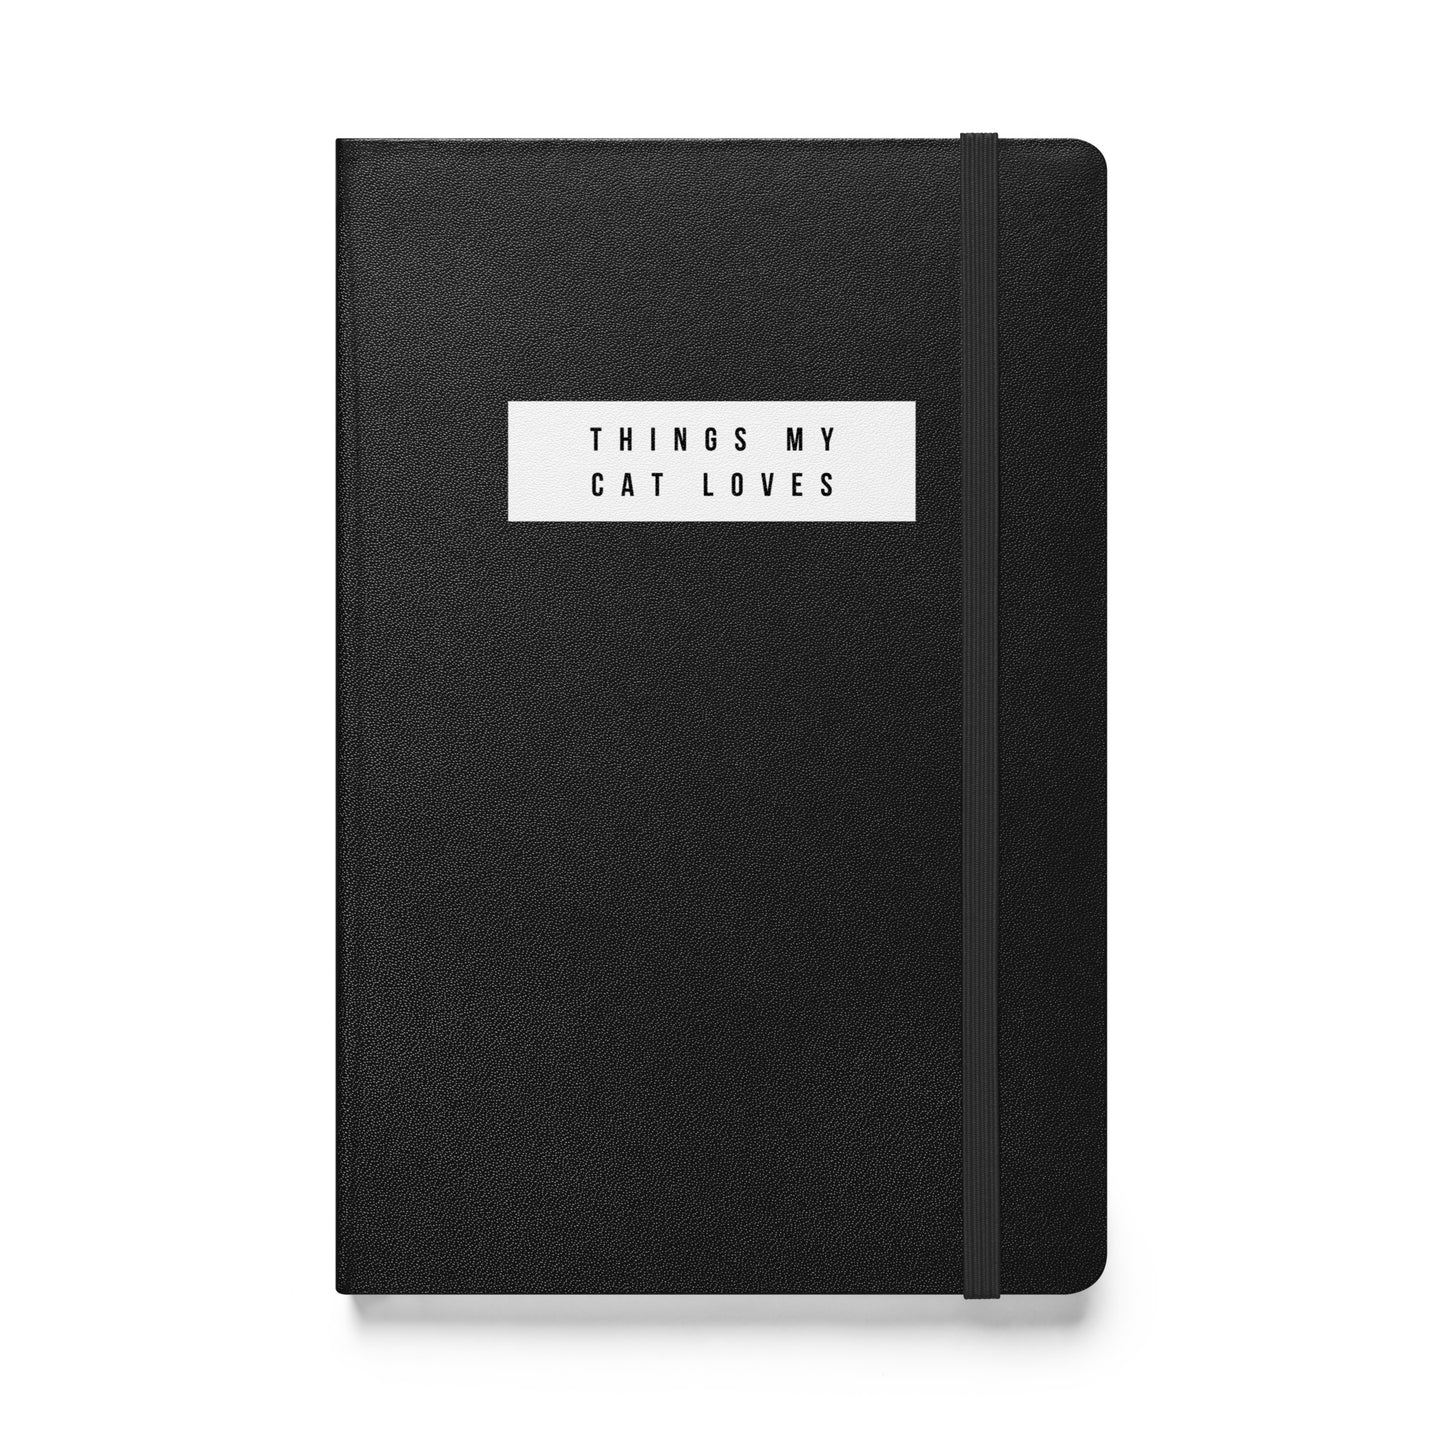 Things My Cat Loves - Hardcover bound notebook